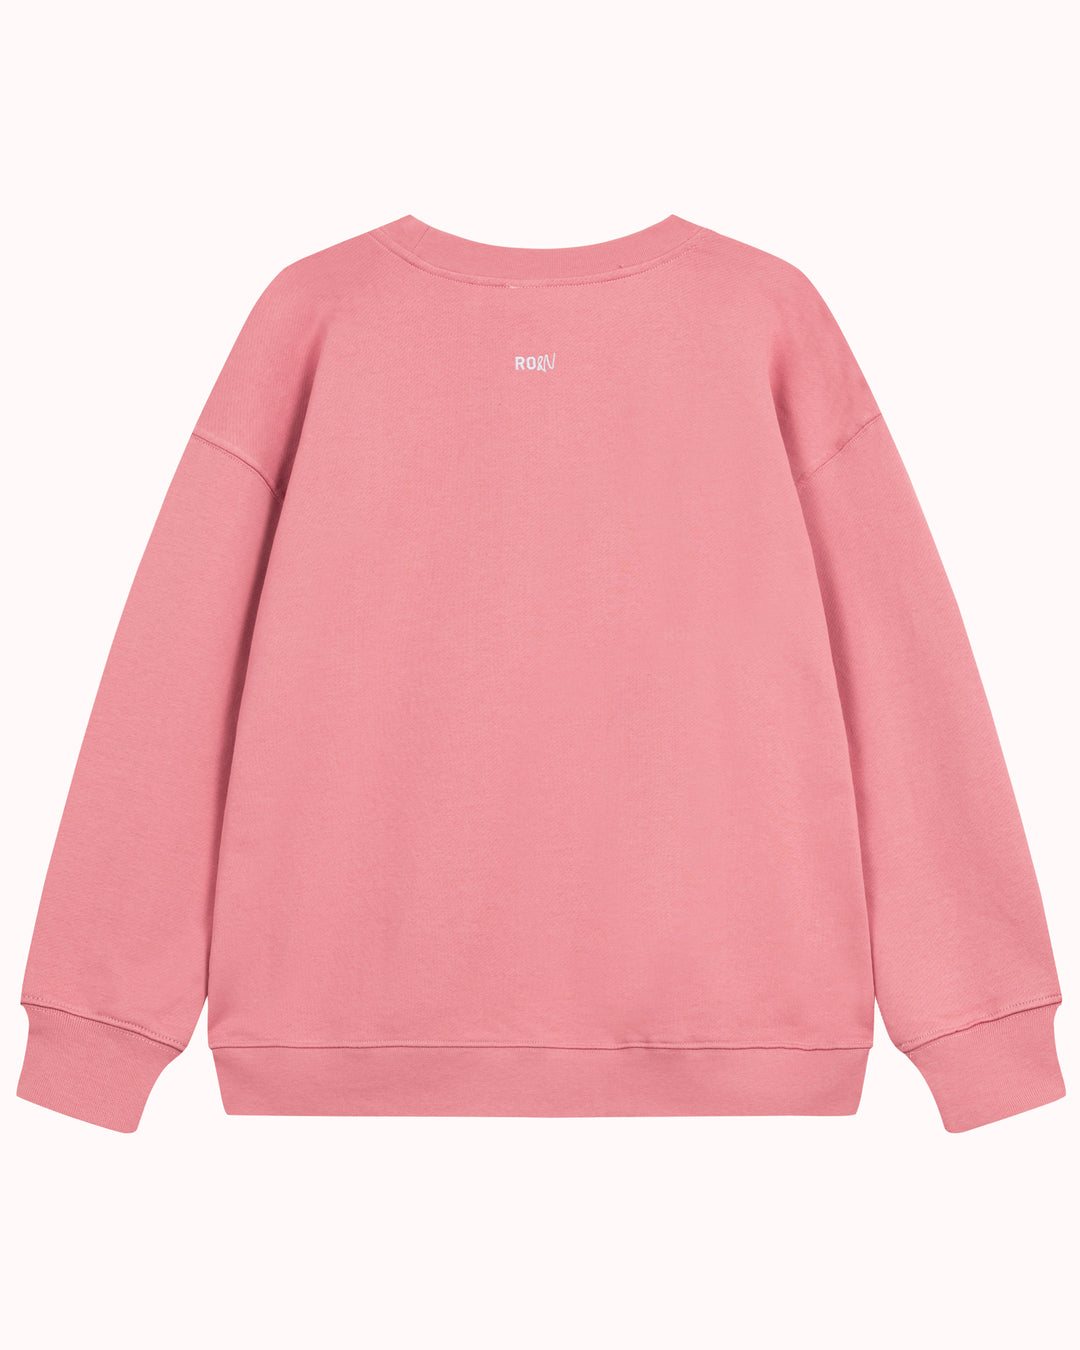 Higher Self On Relaxed Sweatshirt Raspberry Vintage Washed